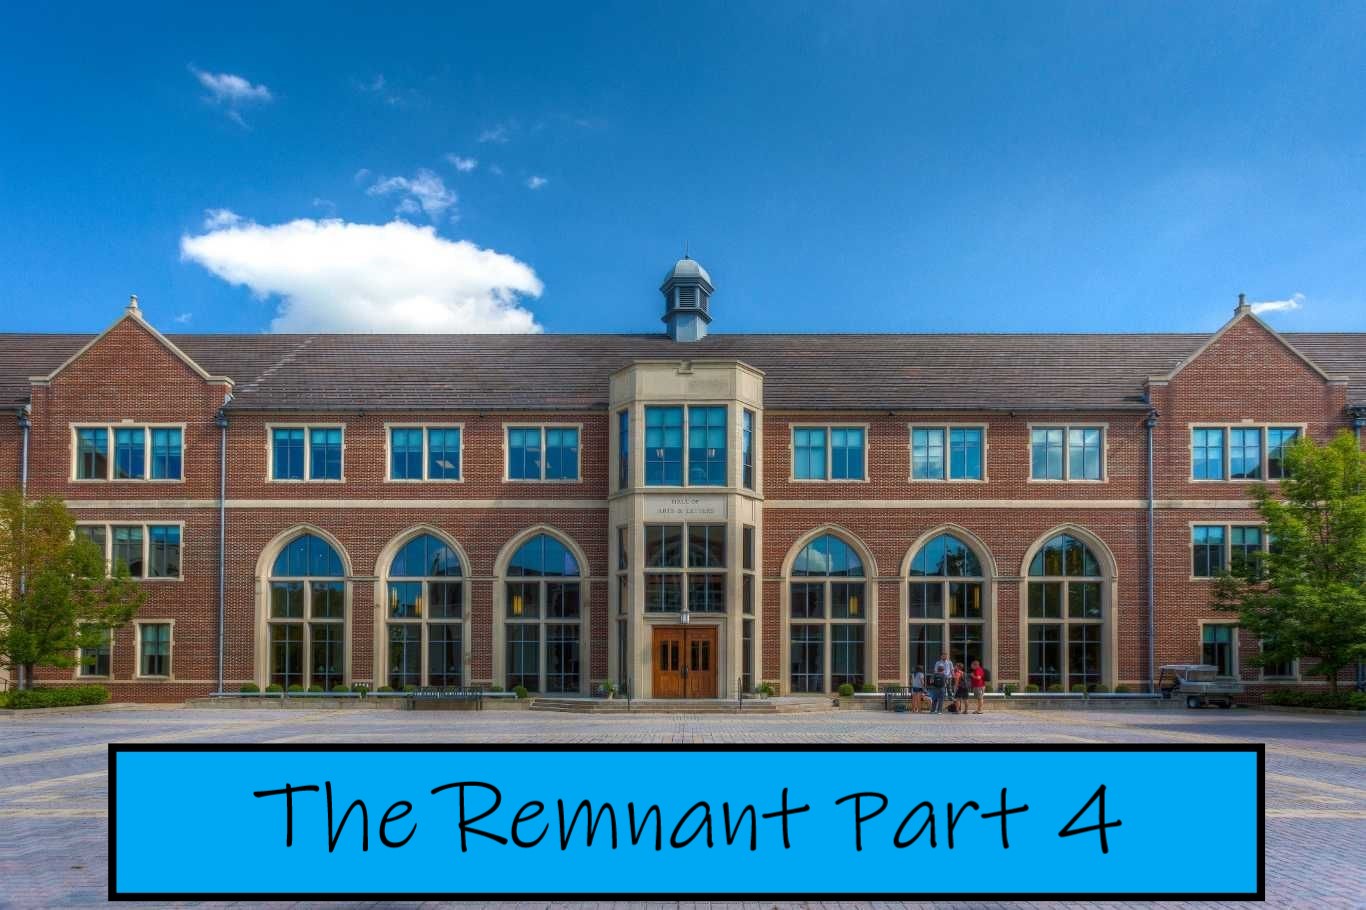 The Remnant Part 4